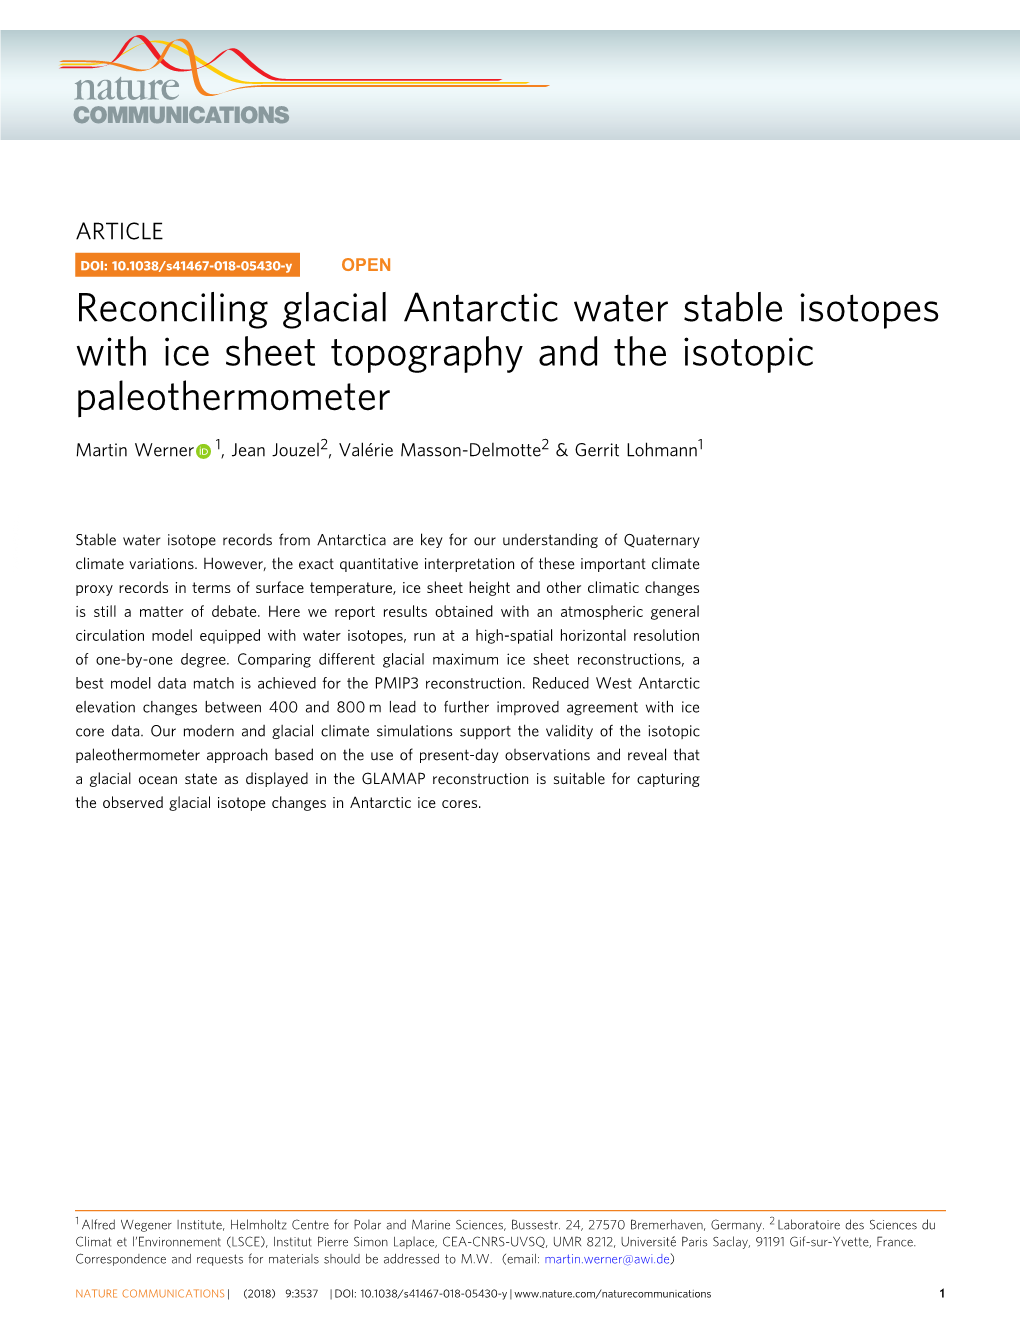 Reconciling Glacial Antarctic Water Stable Isotopes with Ice Sheet Topography and the Isotopic Paleothermometer